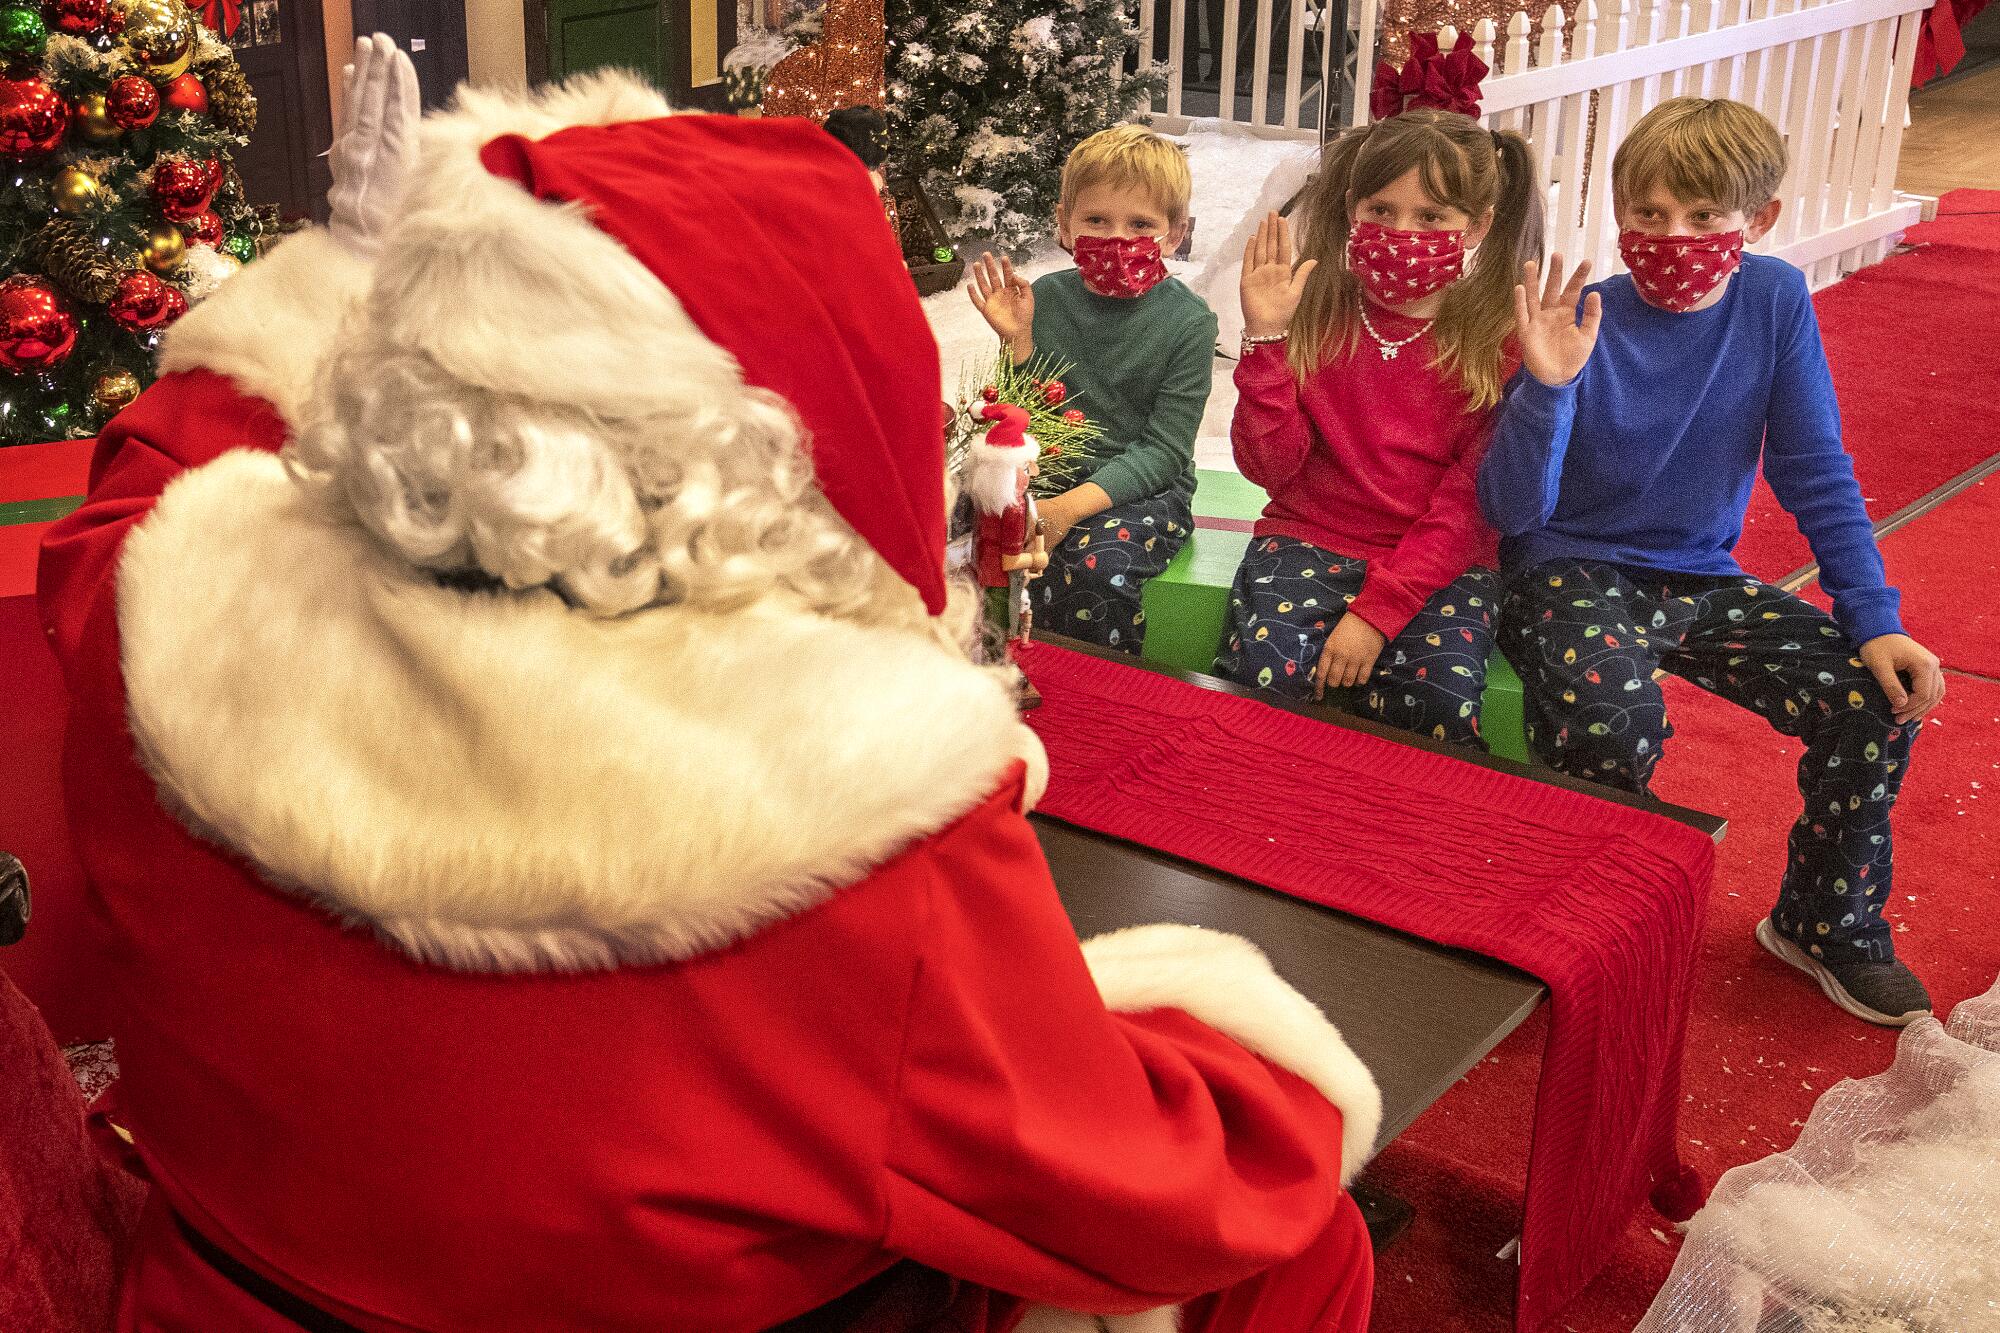 Griffin Hodge, 5, sister Delaney, 7, and brother Wyatt, 10, wear protective masks while sitting at a safe distance from Santa